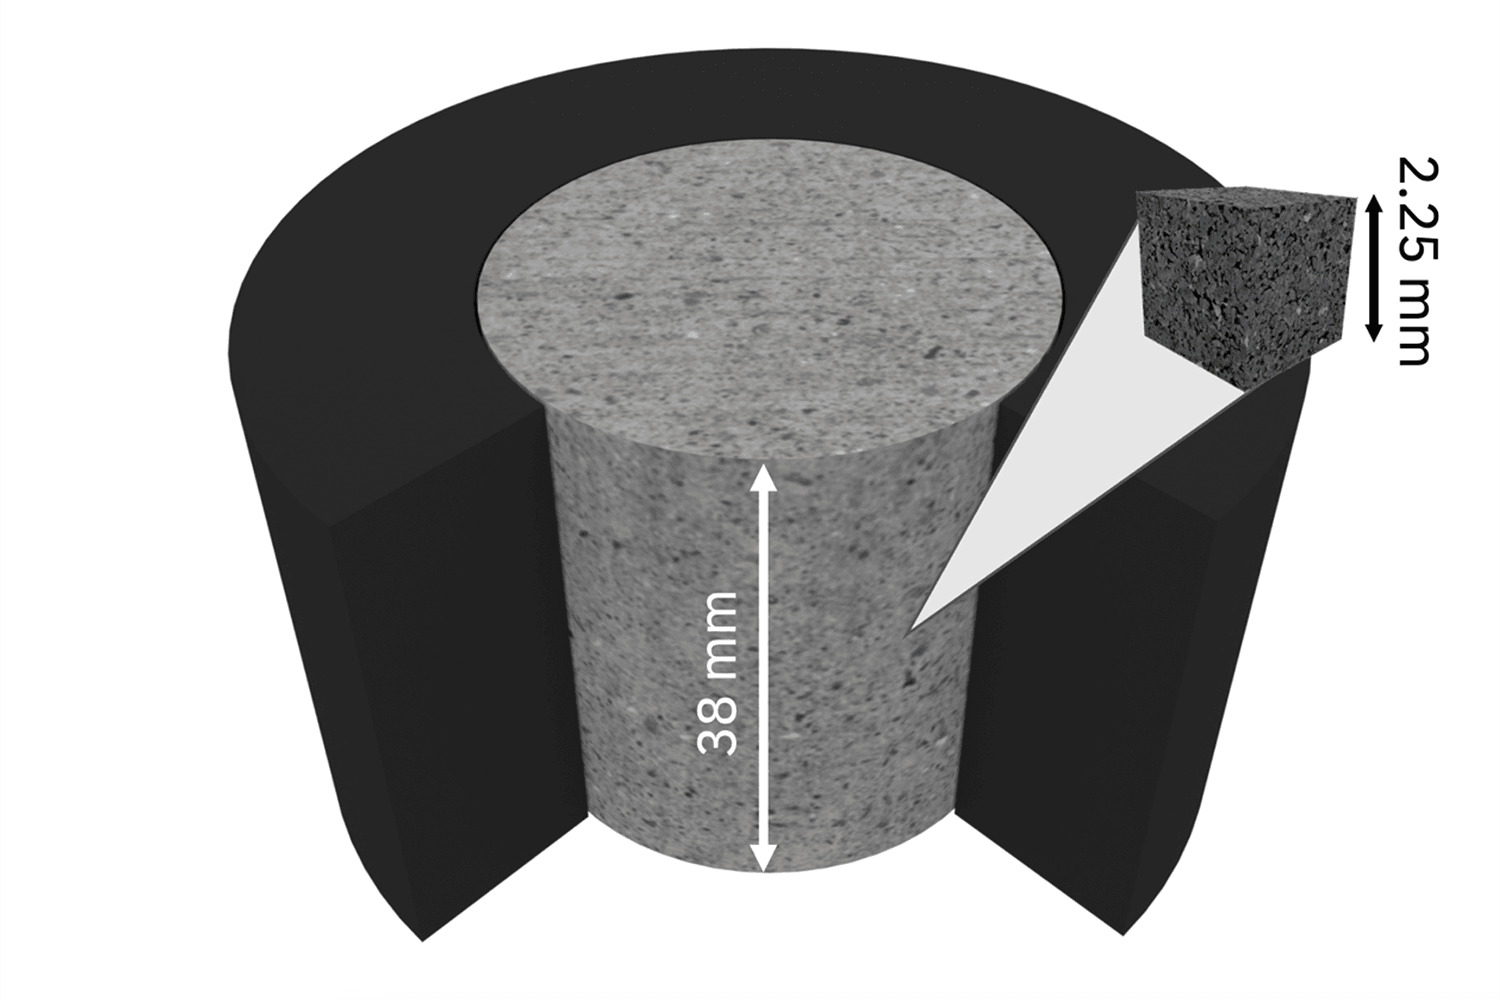 Rock permeability measurements are performed with core plugs that have dimensions of several centimeters.